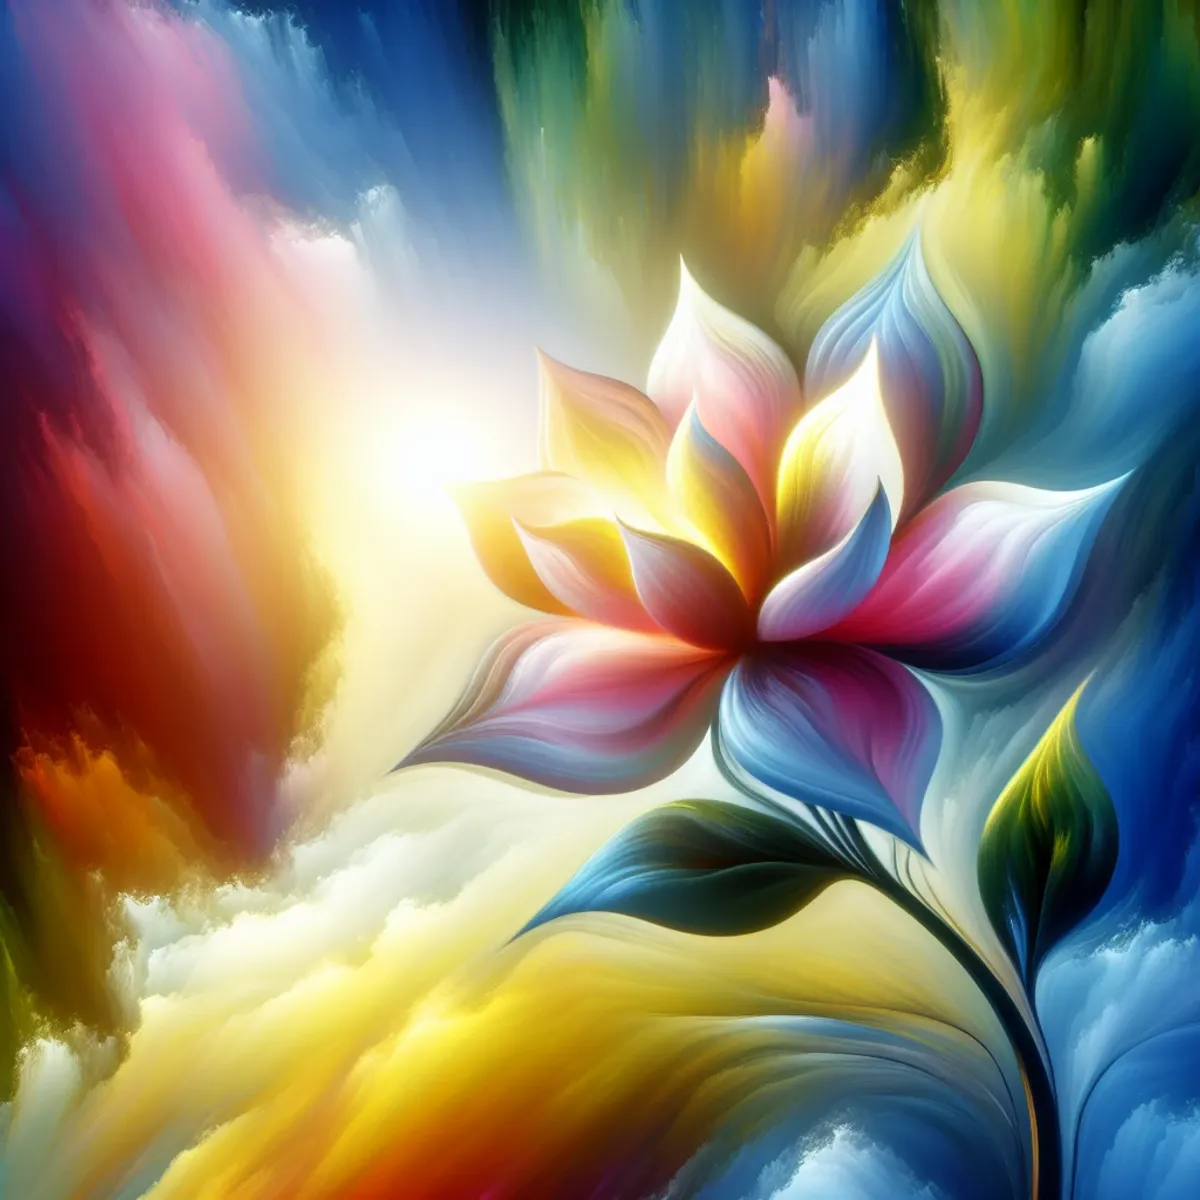 A vibrant, blooming flower with colorful petals opening up, symbolizing growth and hope in overcoming depression.